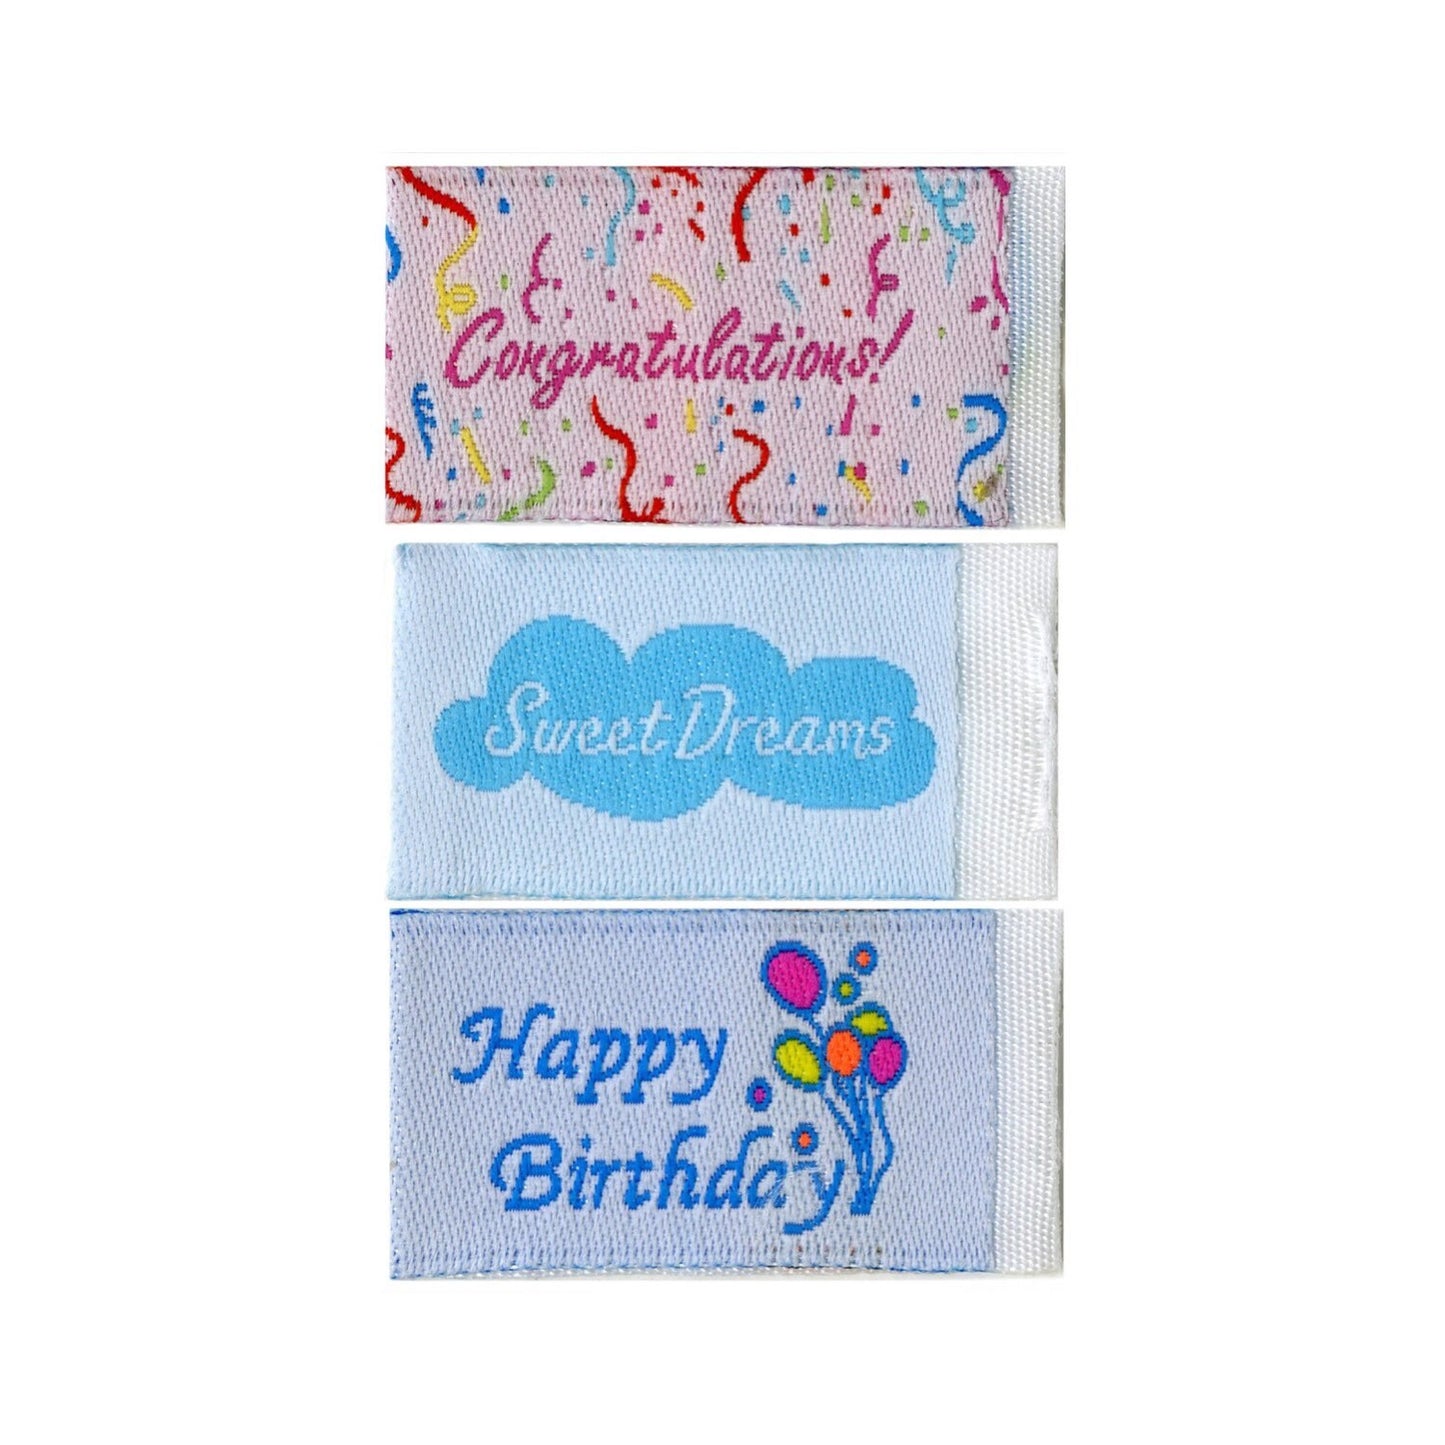 Celebrations Tag It Ons - Happy Birthday Quilt Labels - Congratulations Quilt Label - Sweet Dreams Quilt Label - 12 Tags Per Pack